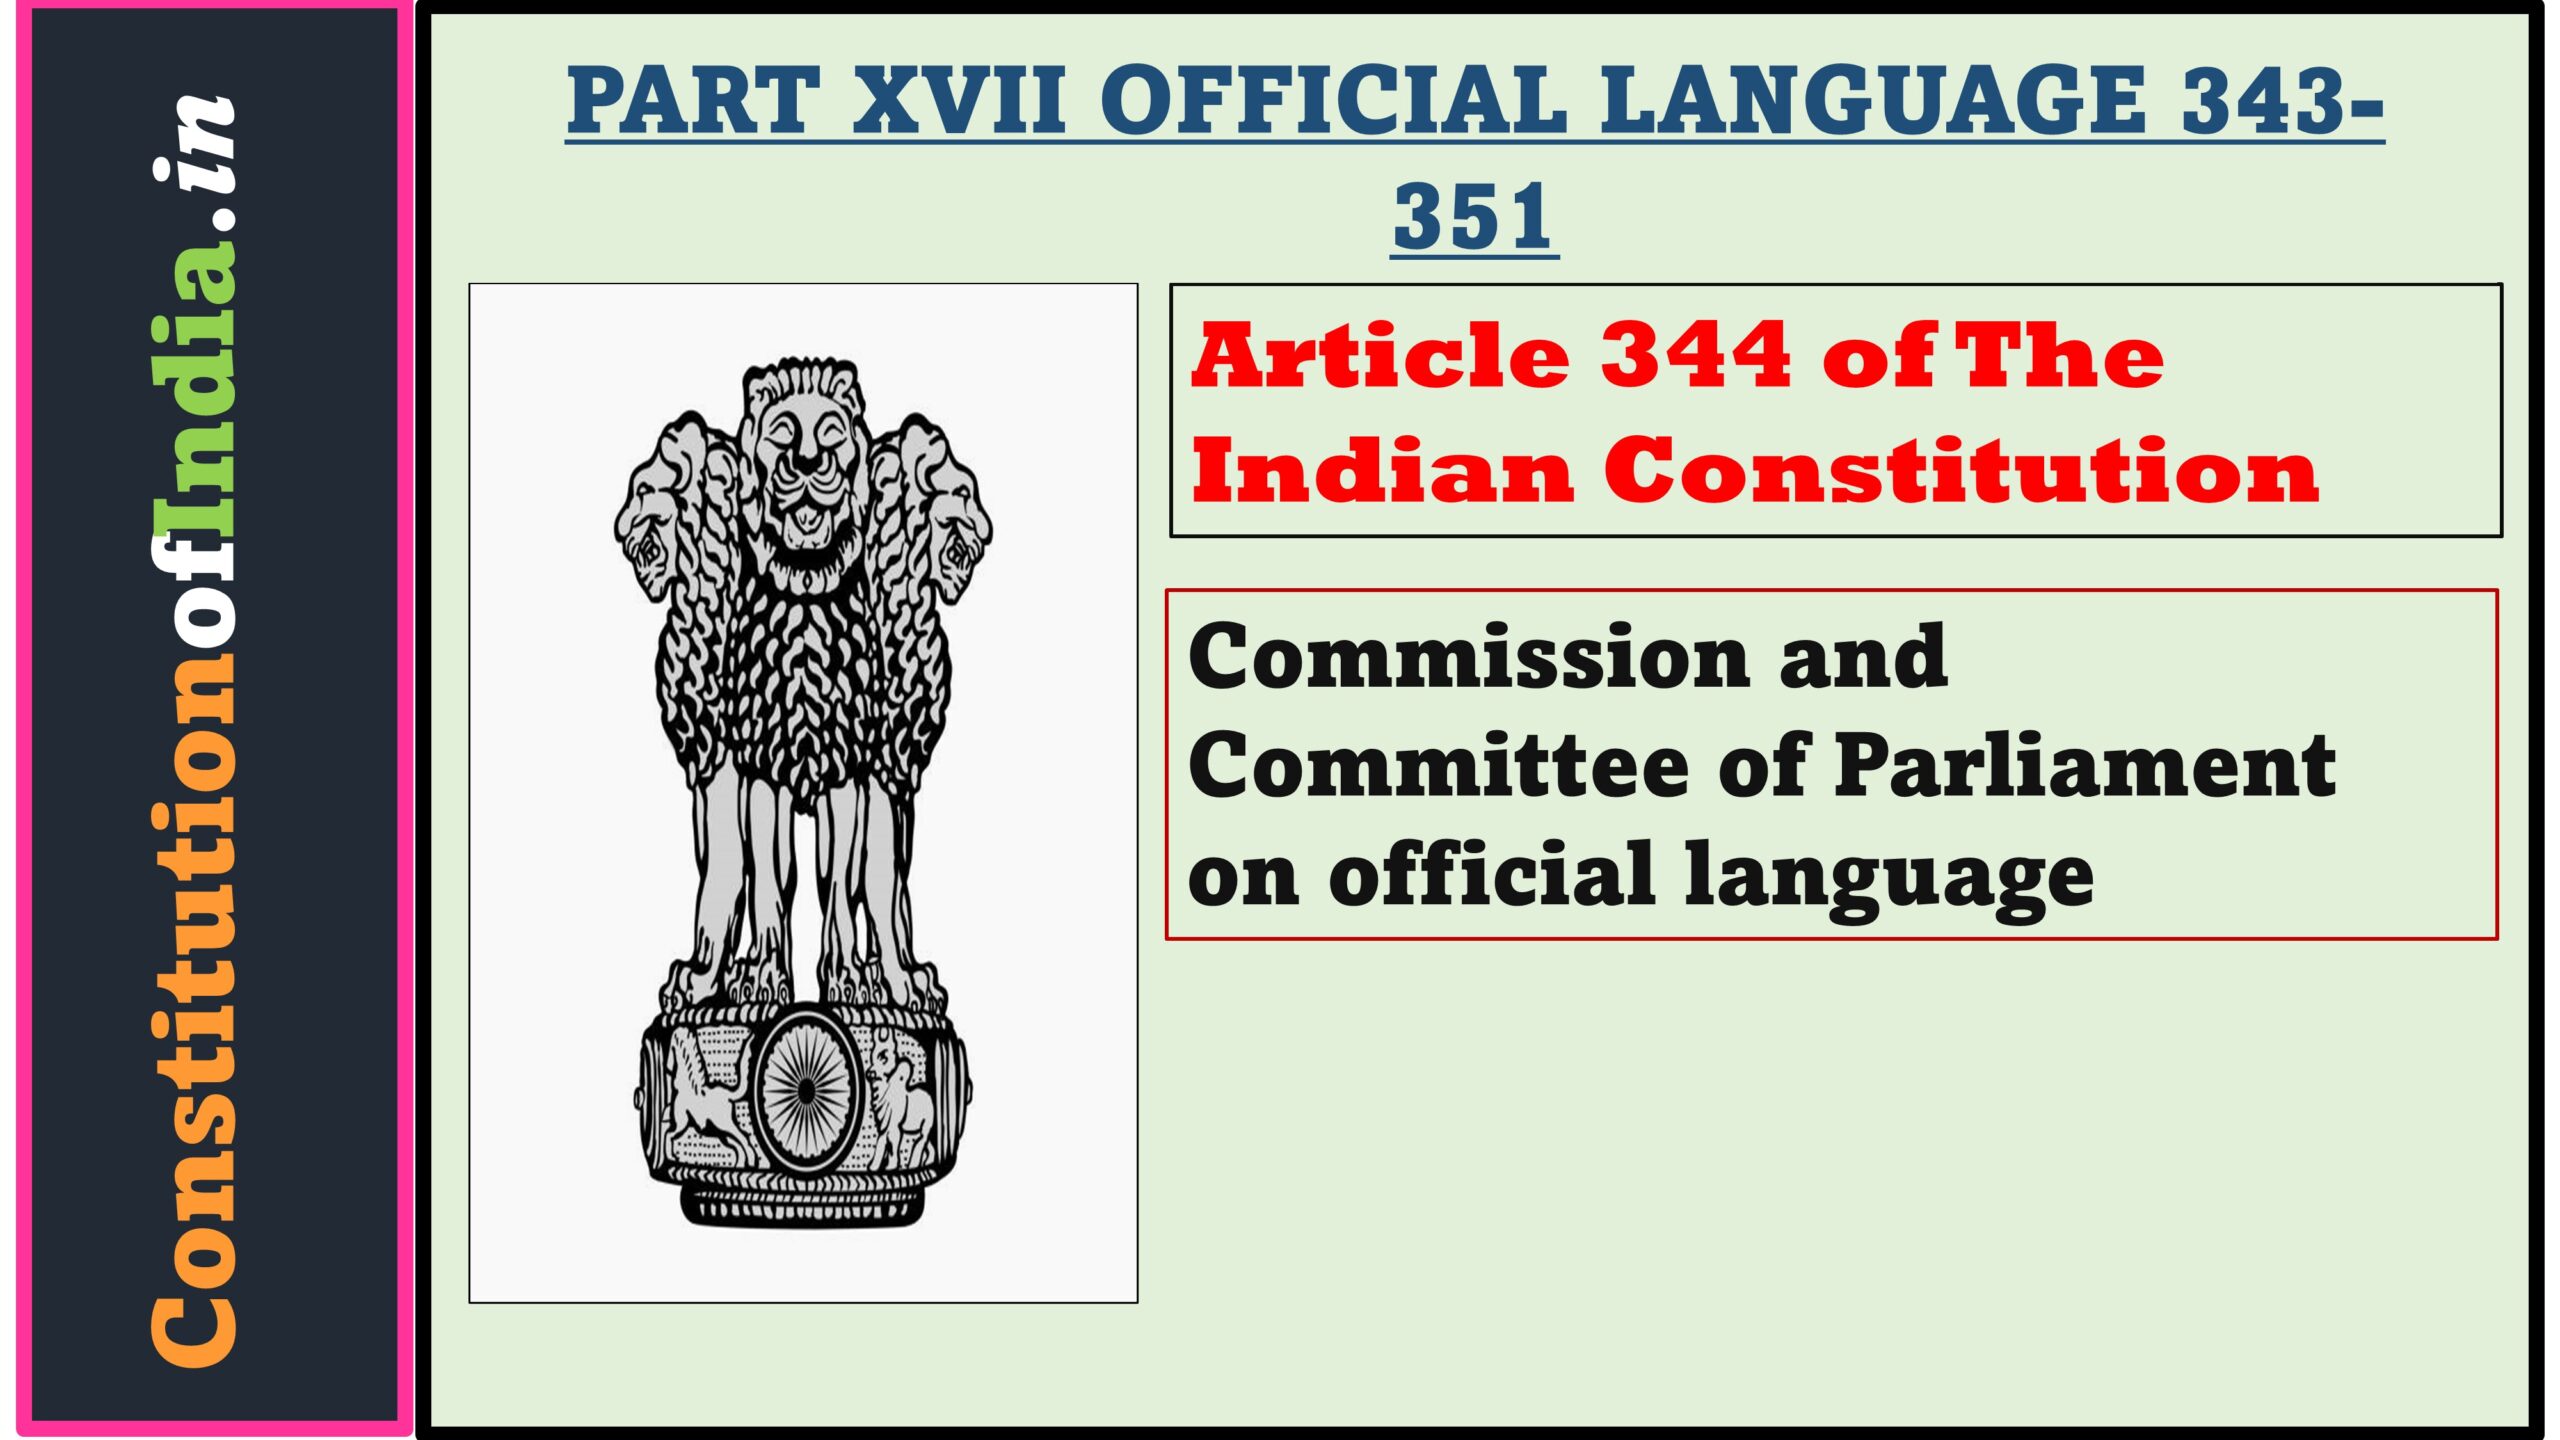 Article 344 of The Indian Constitution